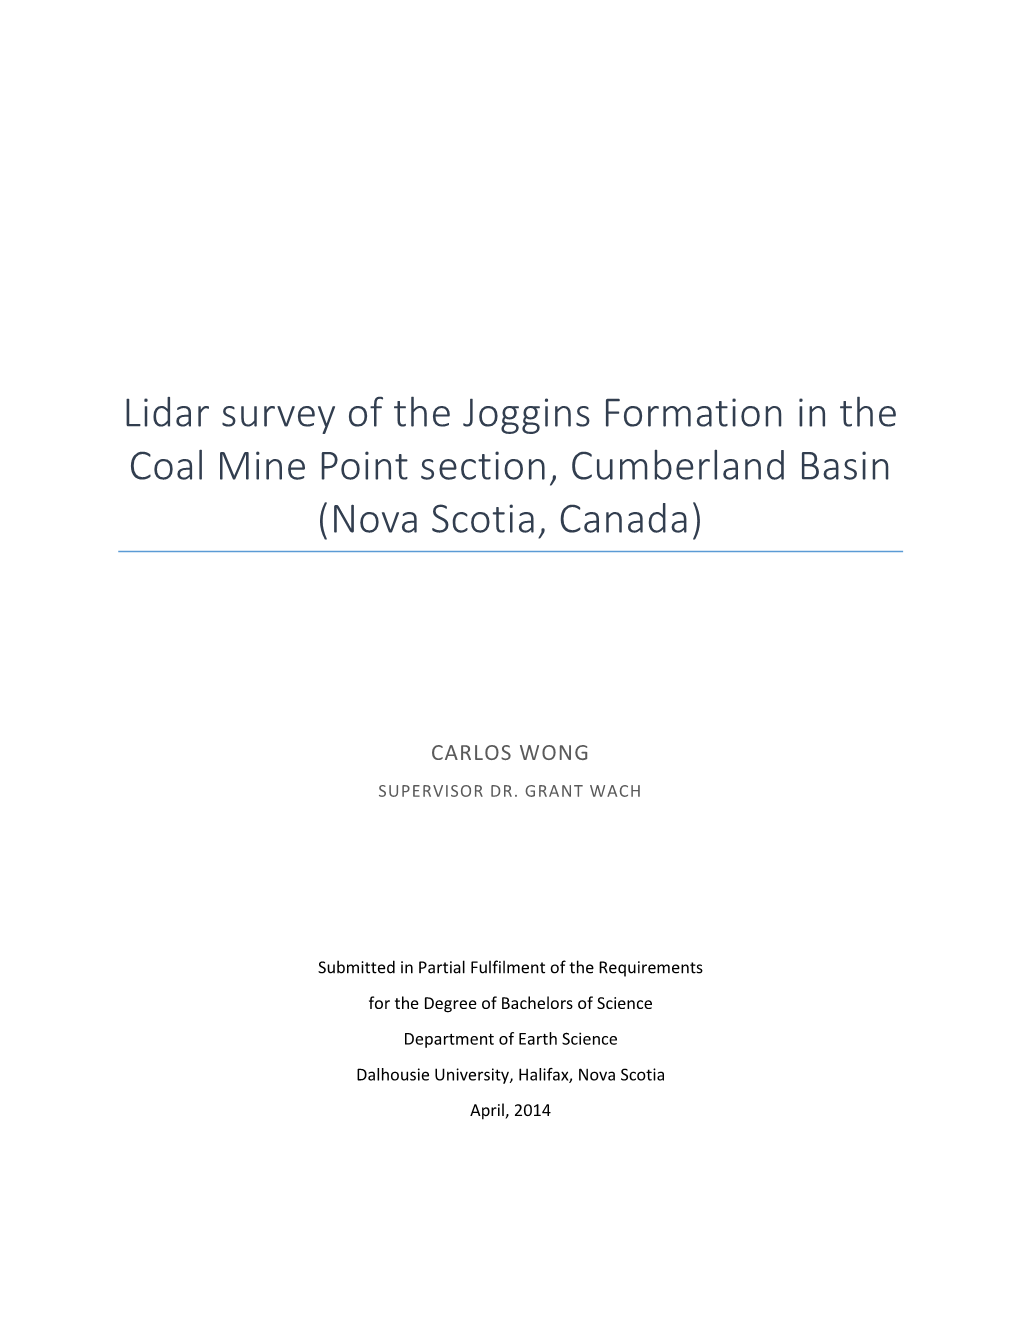 Lidar Survey of the Joggins Formation in the Coal Mine Point Section, Cumberland Basin (Nova Scotia, Canada)